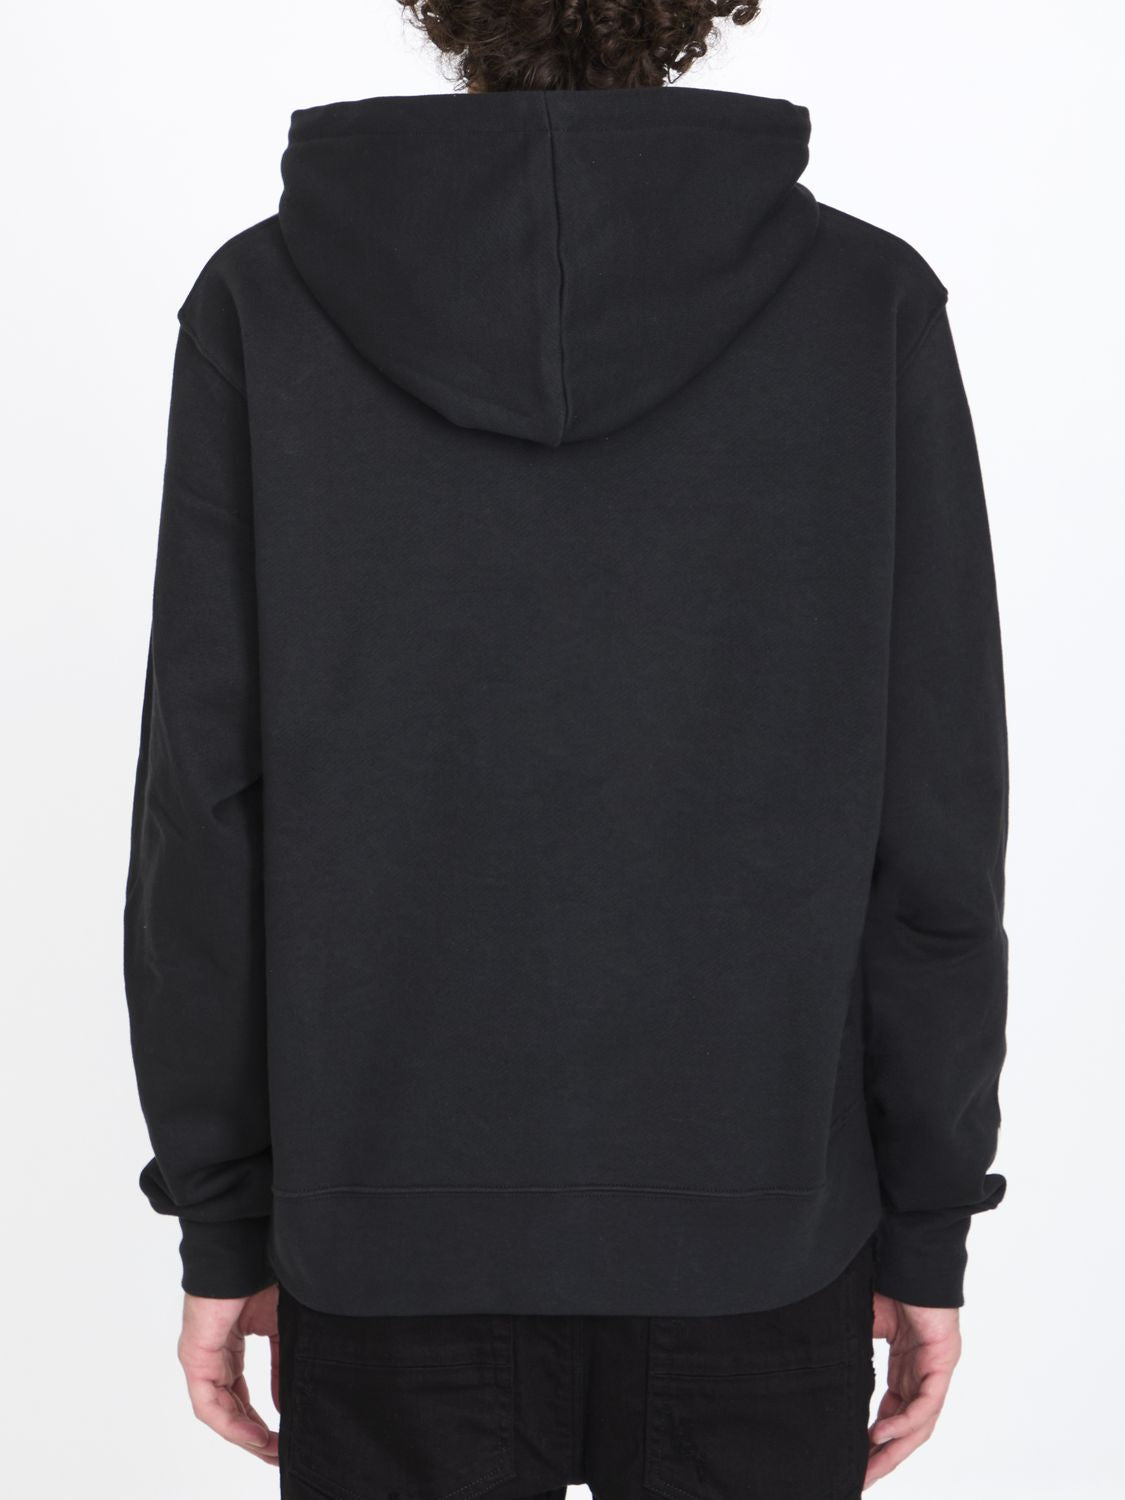 AMIRI Staggered Logo Hoodie in Black Cotton for Men